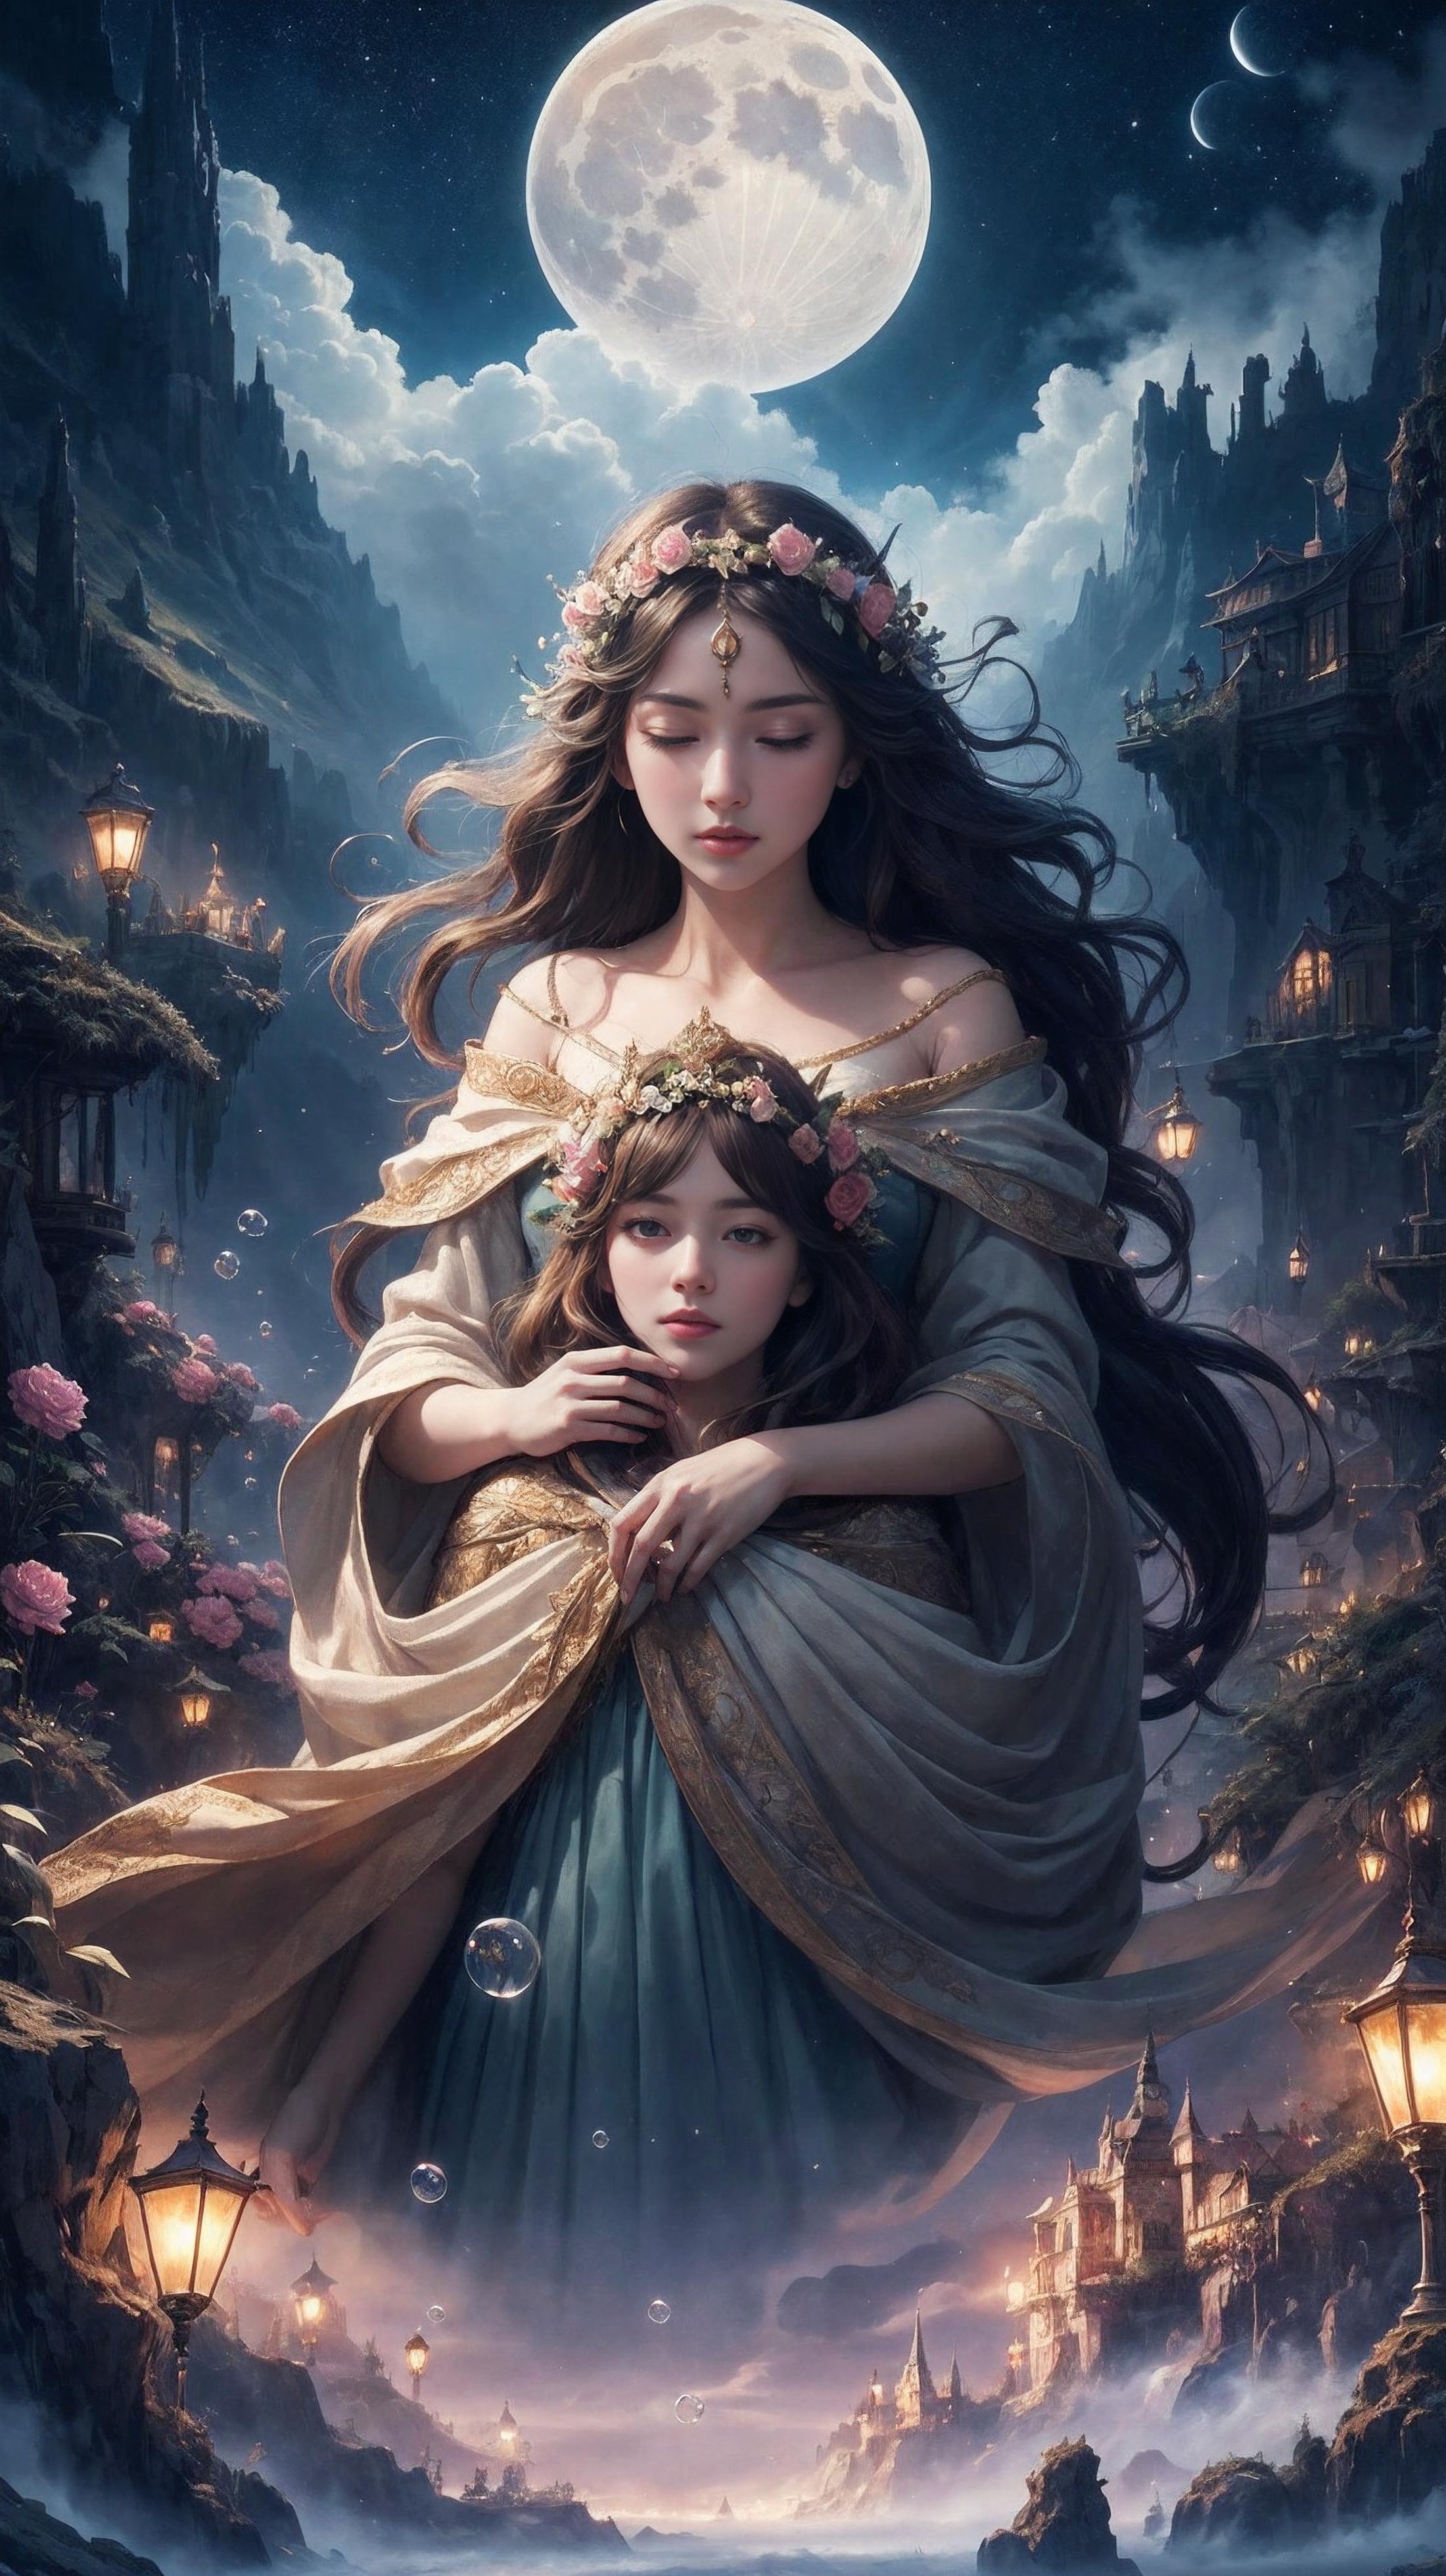 A painting of a woman and a child in a fantasy setting.